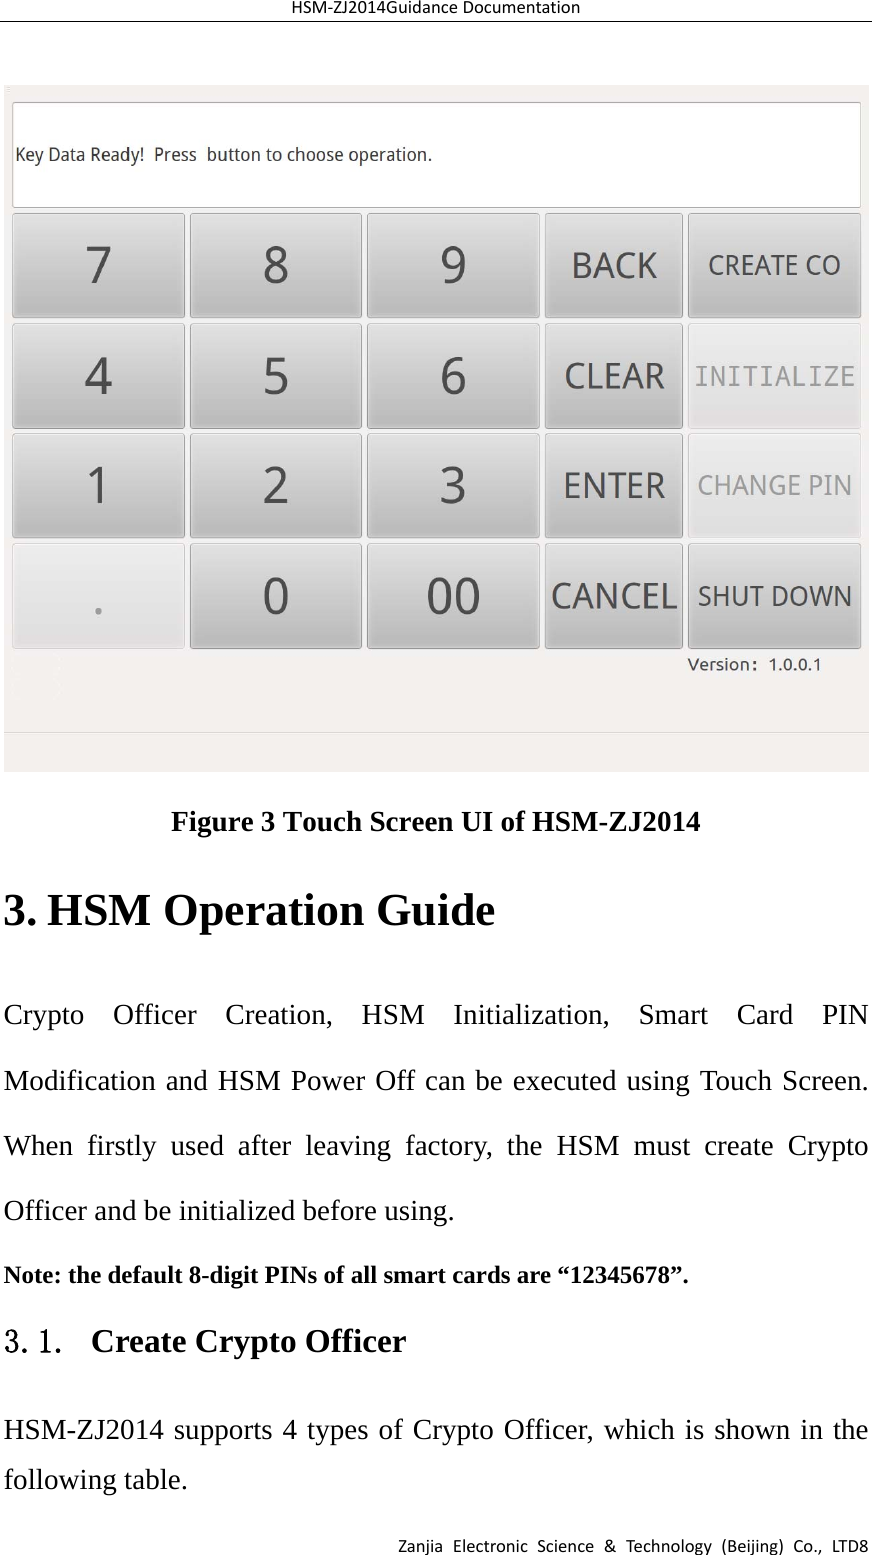 HSM‐ZJ2014GuidanceDocumentationZanjiaElectronicScience&amp;Technology(Beijing)Co.,LTD8 Figure 3 Touch Screen UI of HSM-ZJ2014 3. HSM Operation Guide Crypto Officer Creation, HSM Initialization, Smart Card PIN Modification and HSM Power Off can be executed using Touch Screen. When firstly used after leaving factory, the HSM must create Crypto Officer and be initialized before using. Note: the default 8-digit PINs of all smart cards are “12345678”. 3.1. Create Crypto Officer HSM-ZJ2014 supports 4 types of Crypto Officer, which is shown in the following table. 